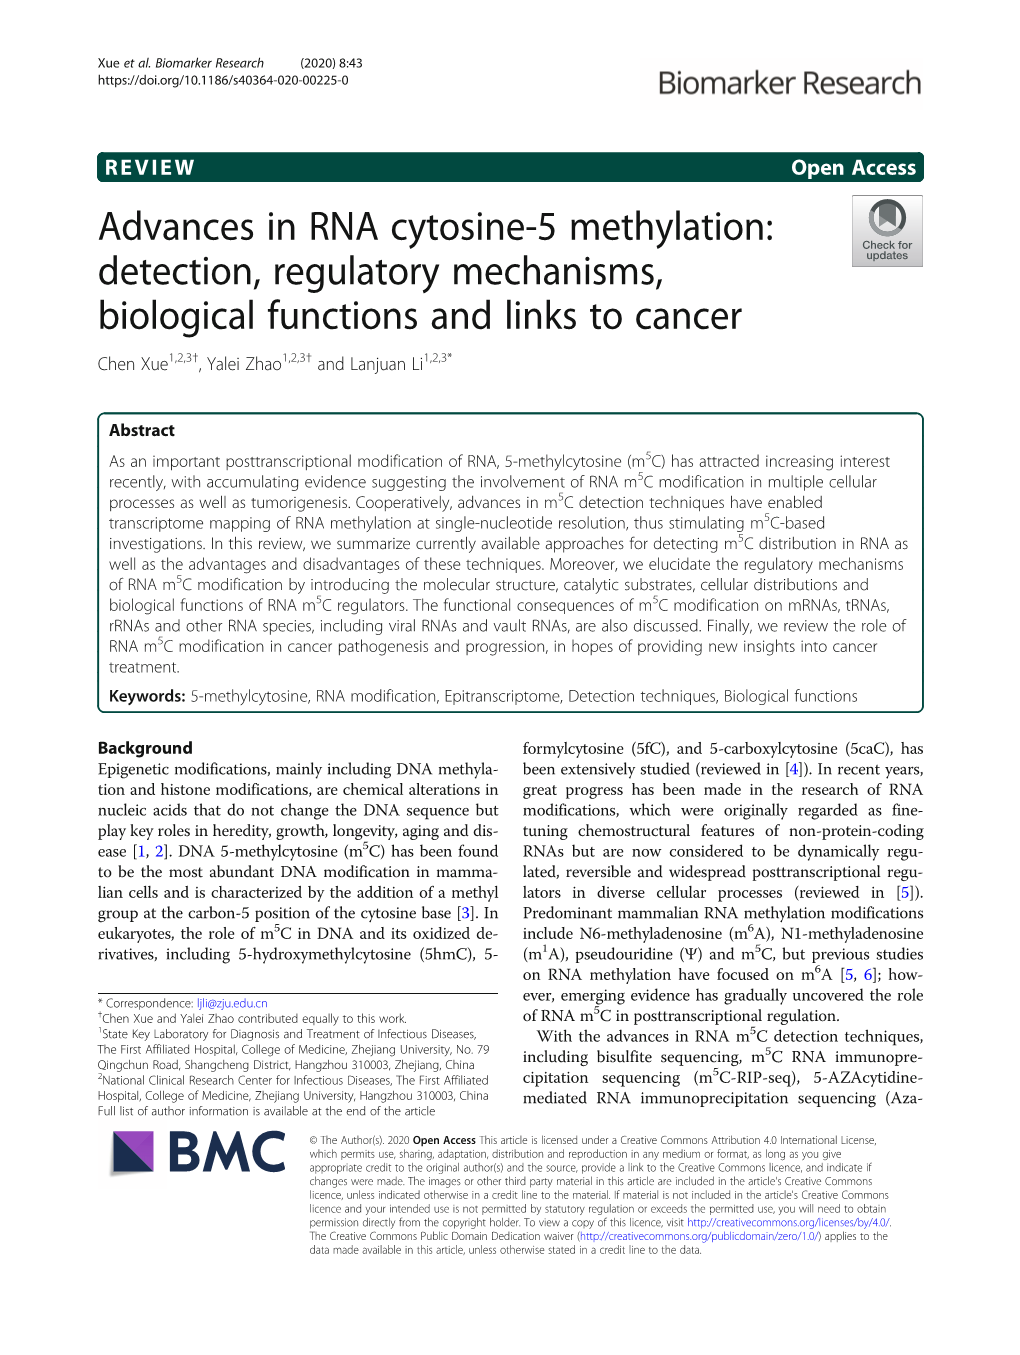 Advances in RNA Cytosine-5 Methylation: Detection, Regulatory Mechanisms, Biological Functions and Links to Cancer